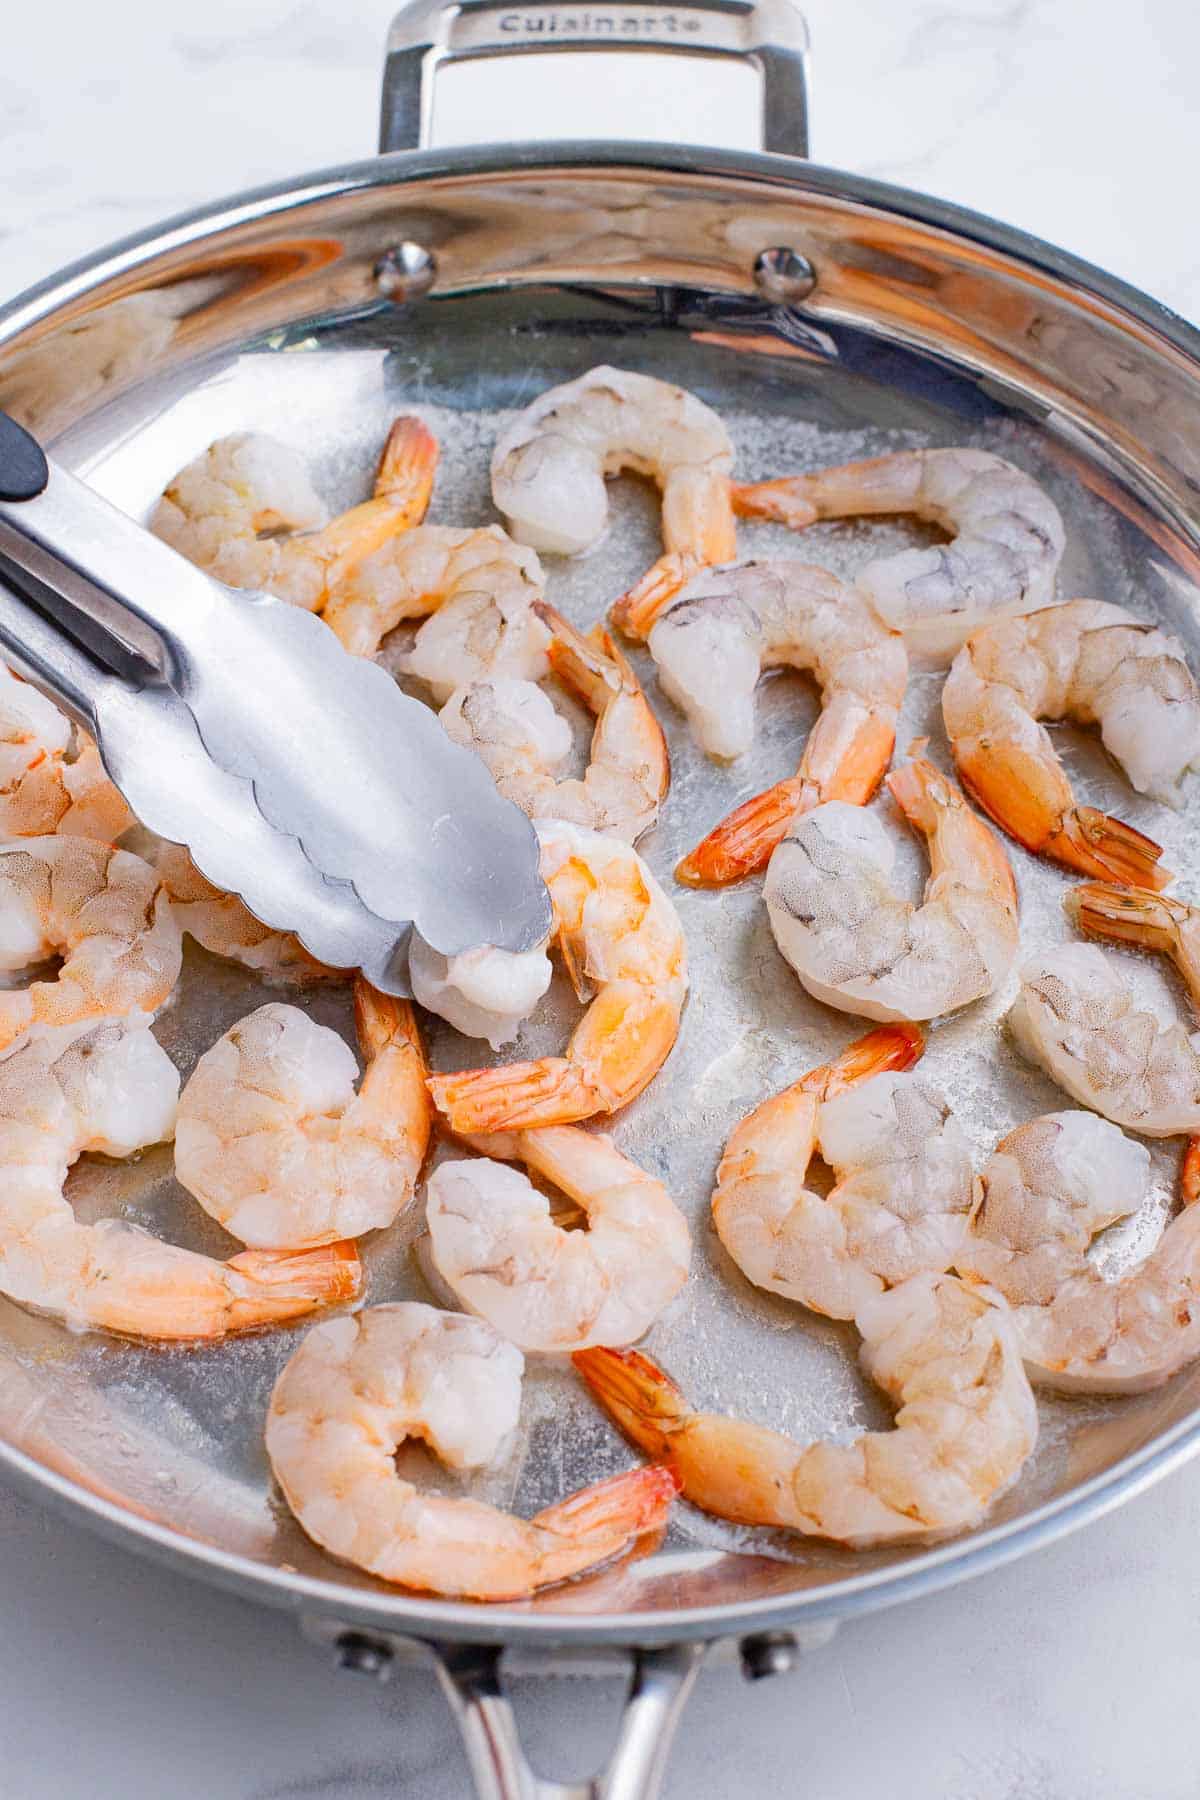 Tongs turn shrimp over as it cooks.